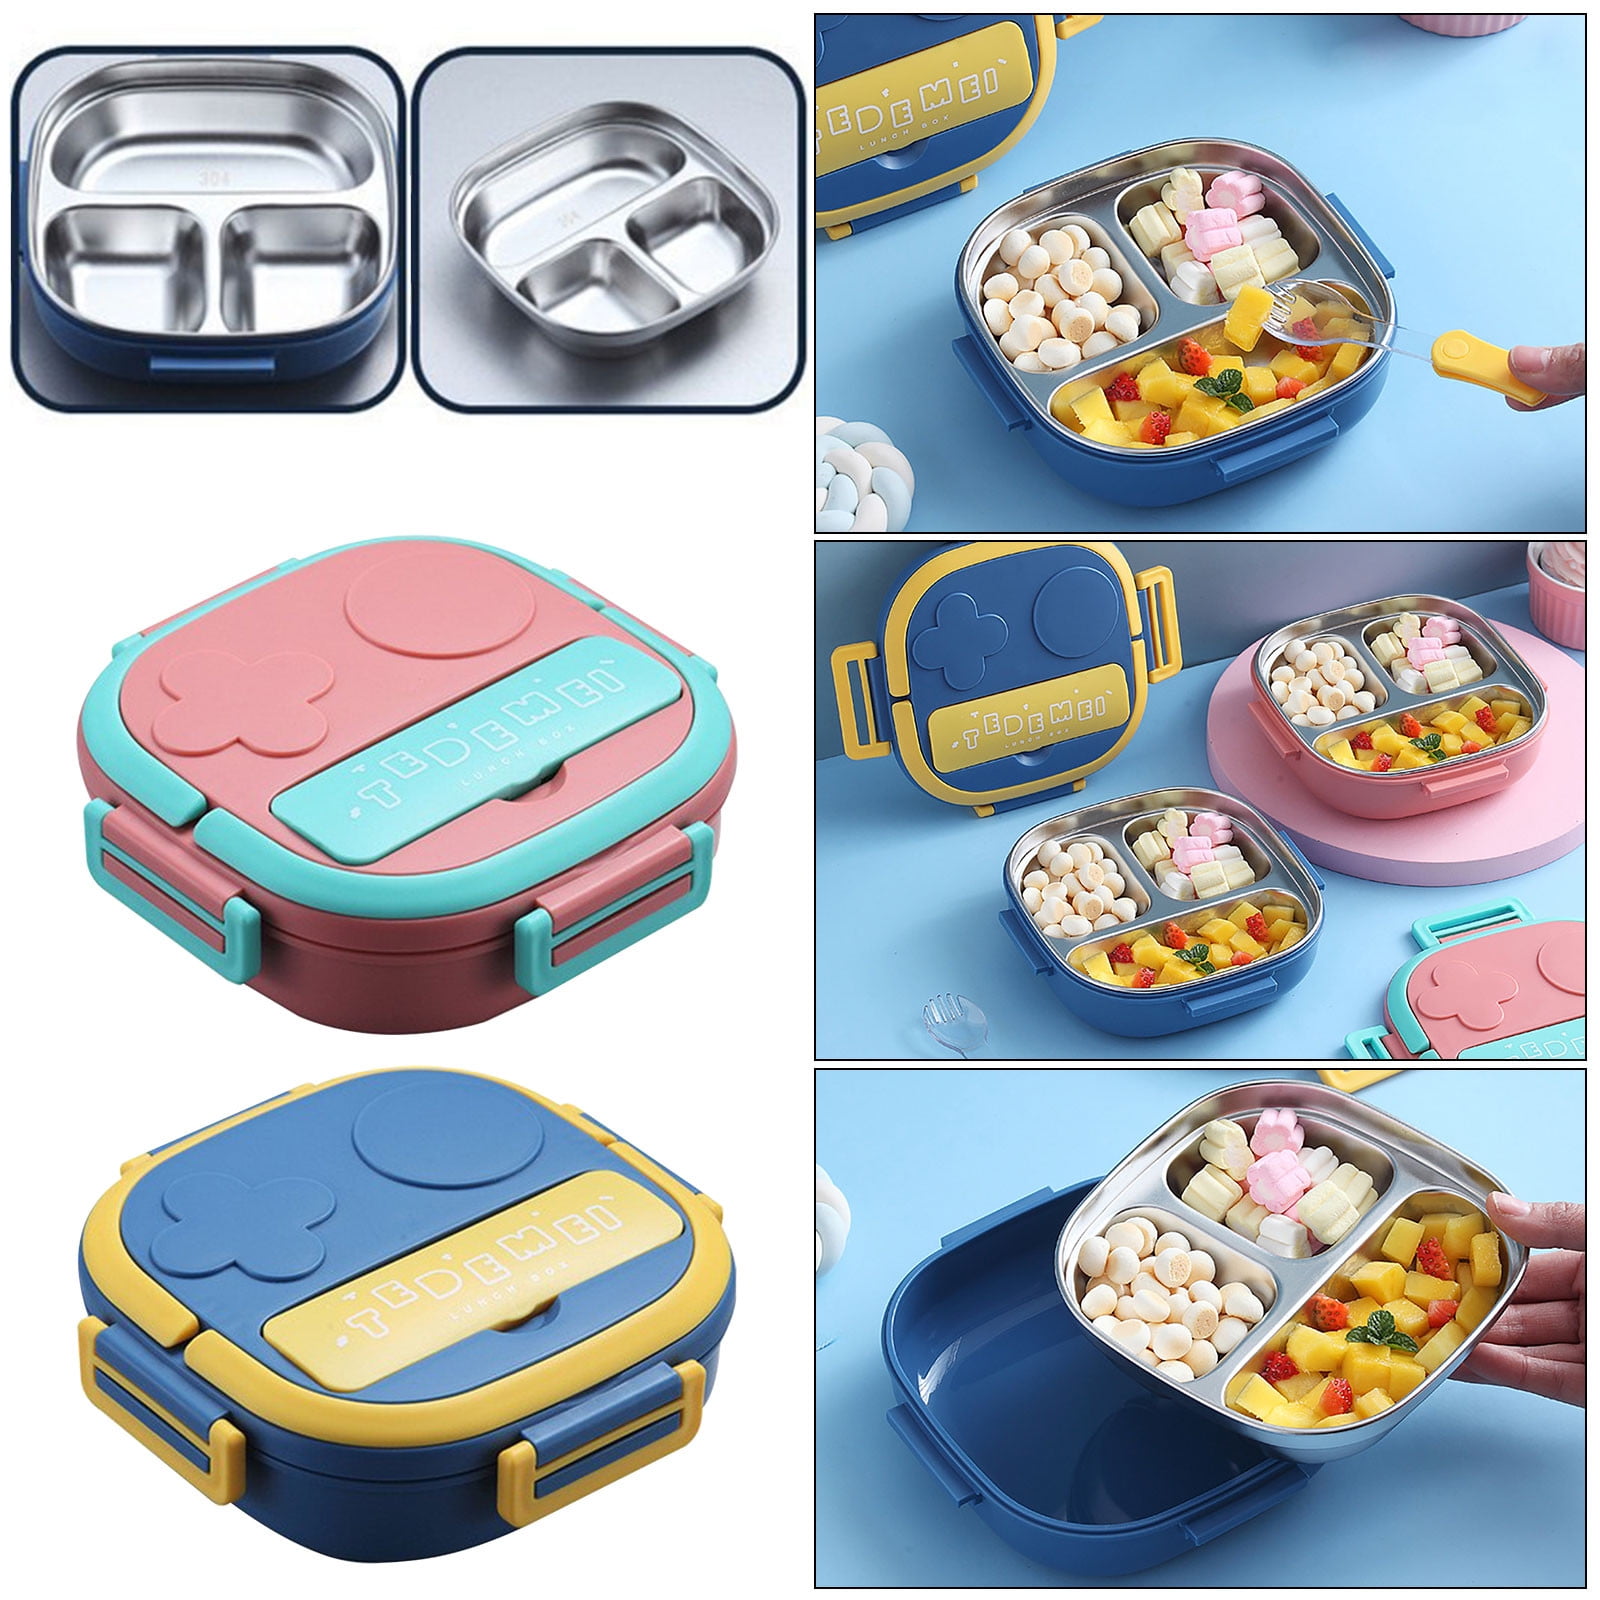 Xmmswdla Bento Box Adult Lunch BoxBlue Lunch Box2100ml 3 Layer Round Food Lunch Box Stainless Steel Lunch Box Lunch Box Food Storage Box Children's